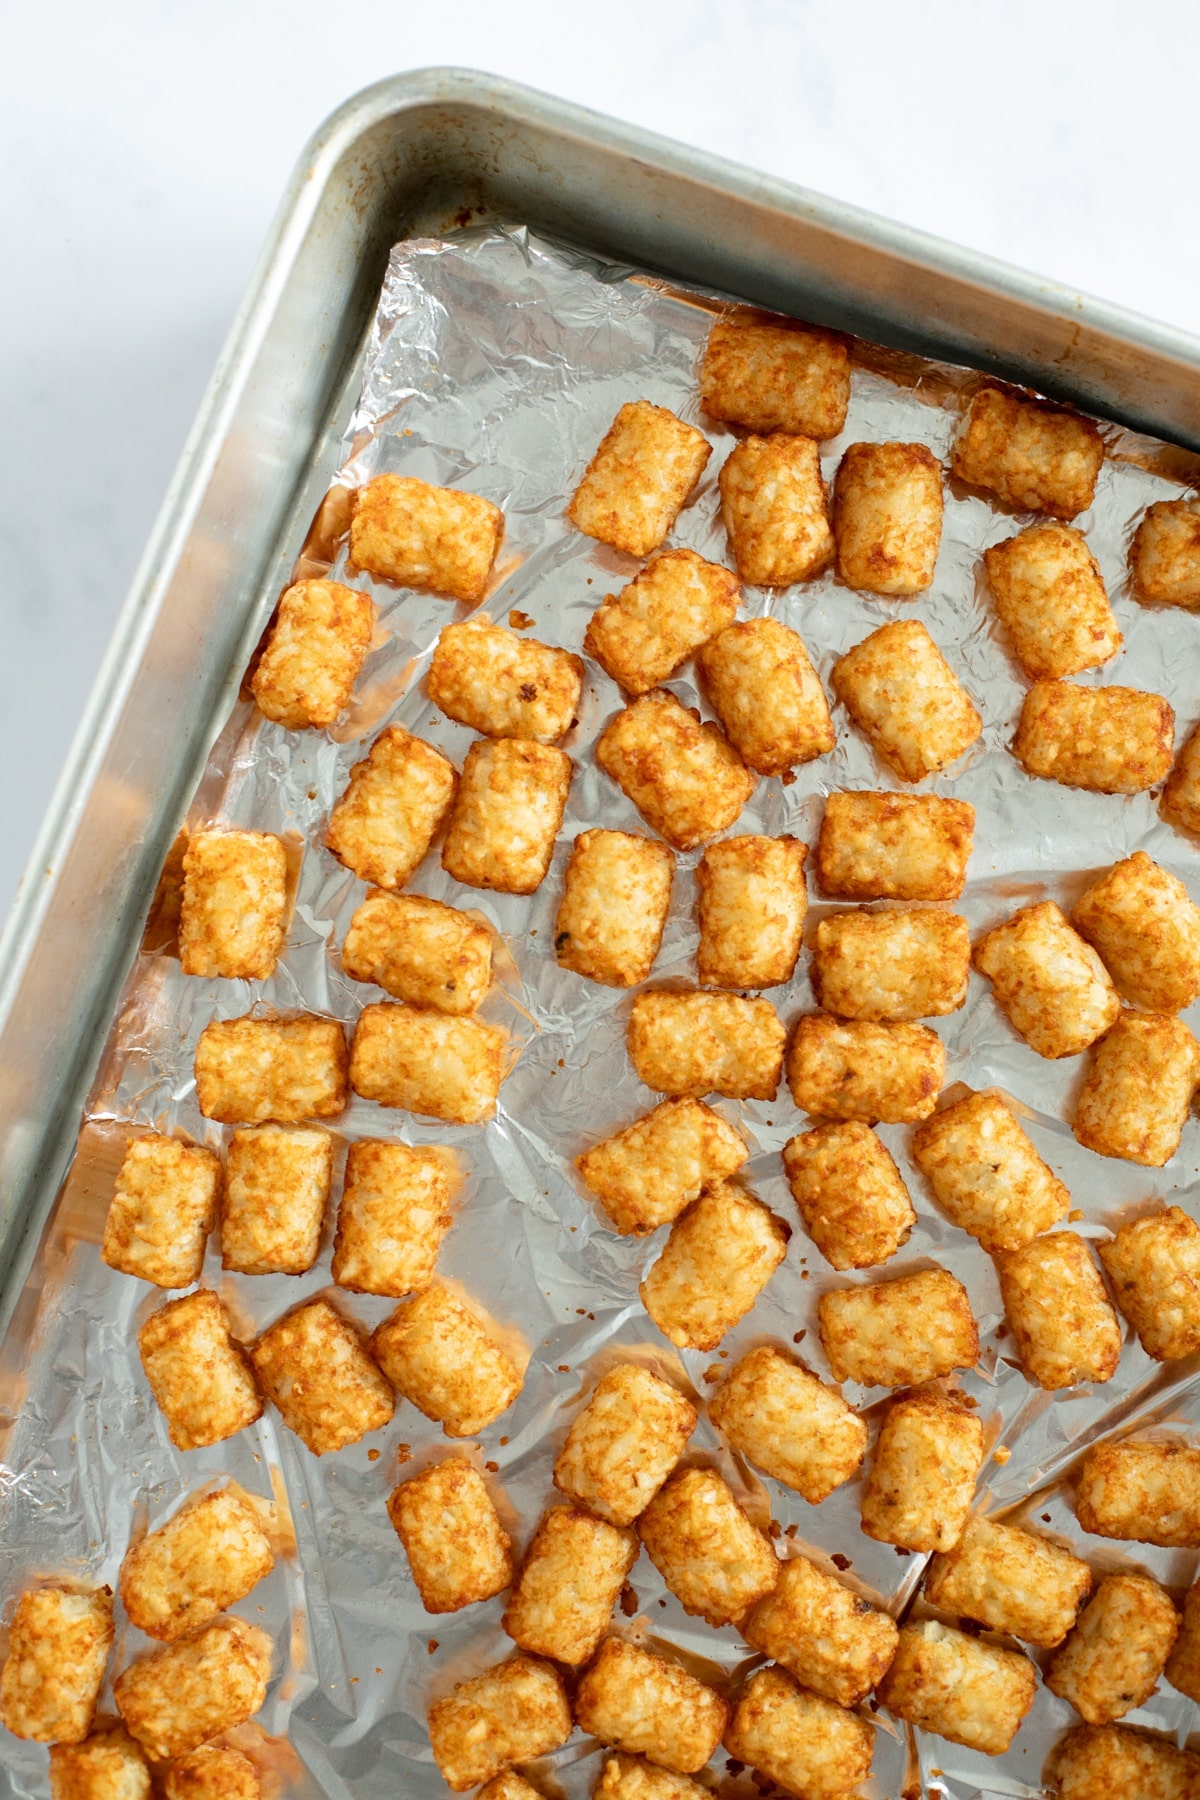 bake the tater tots on a baking sheet